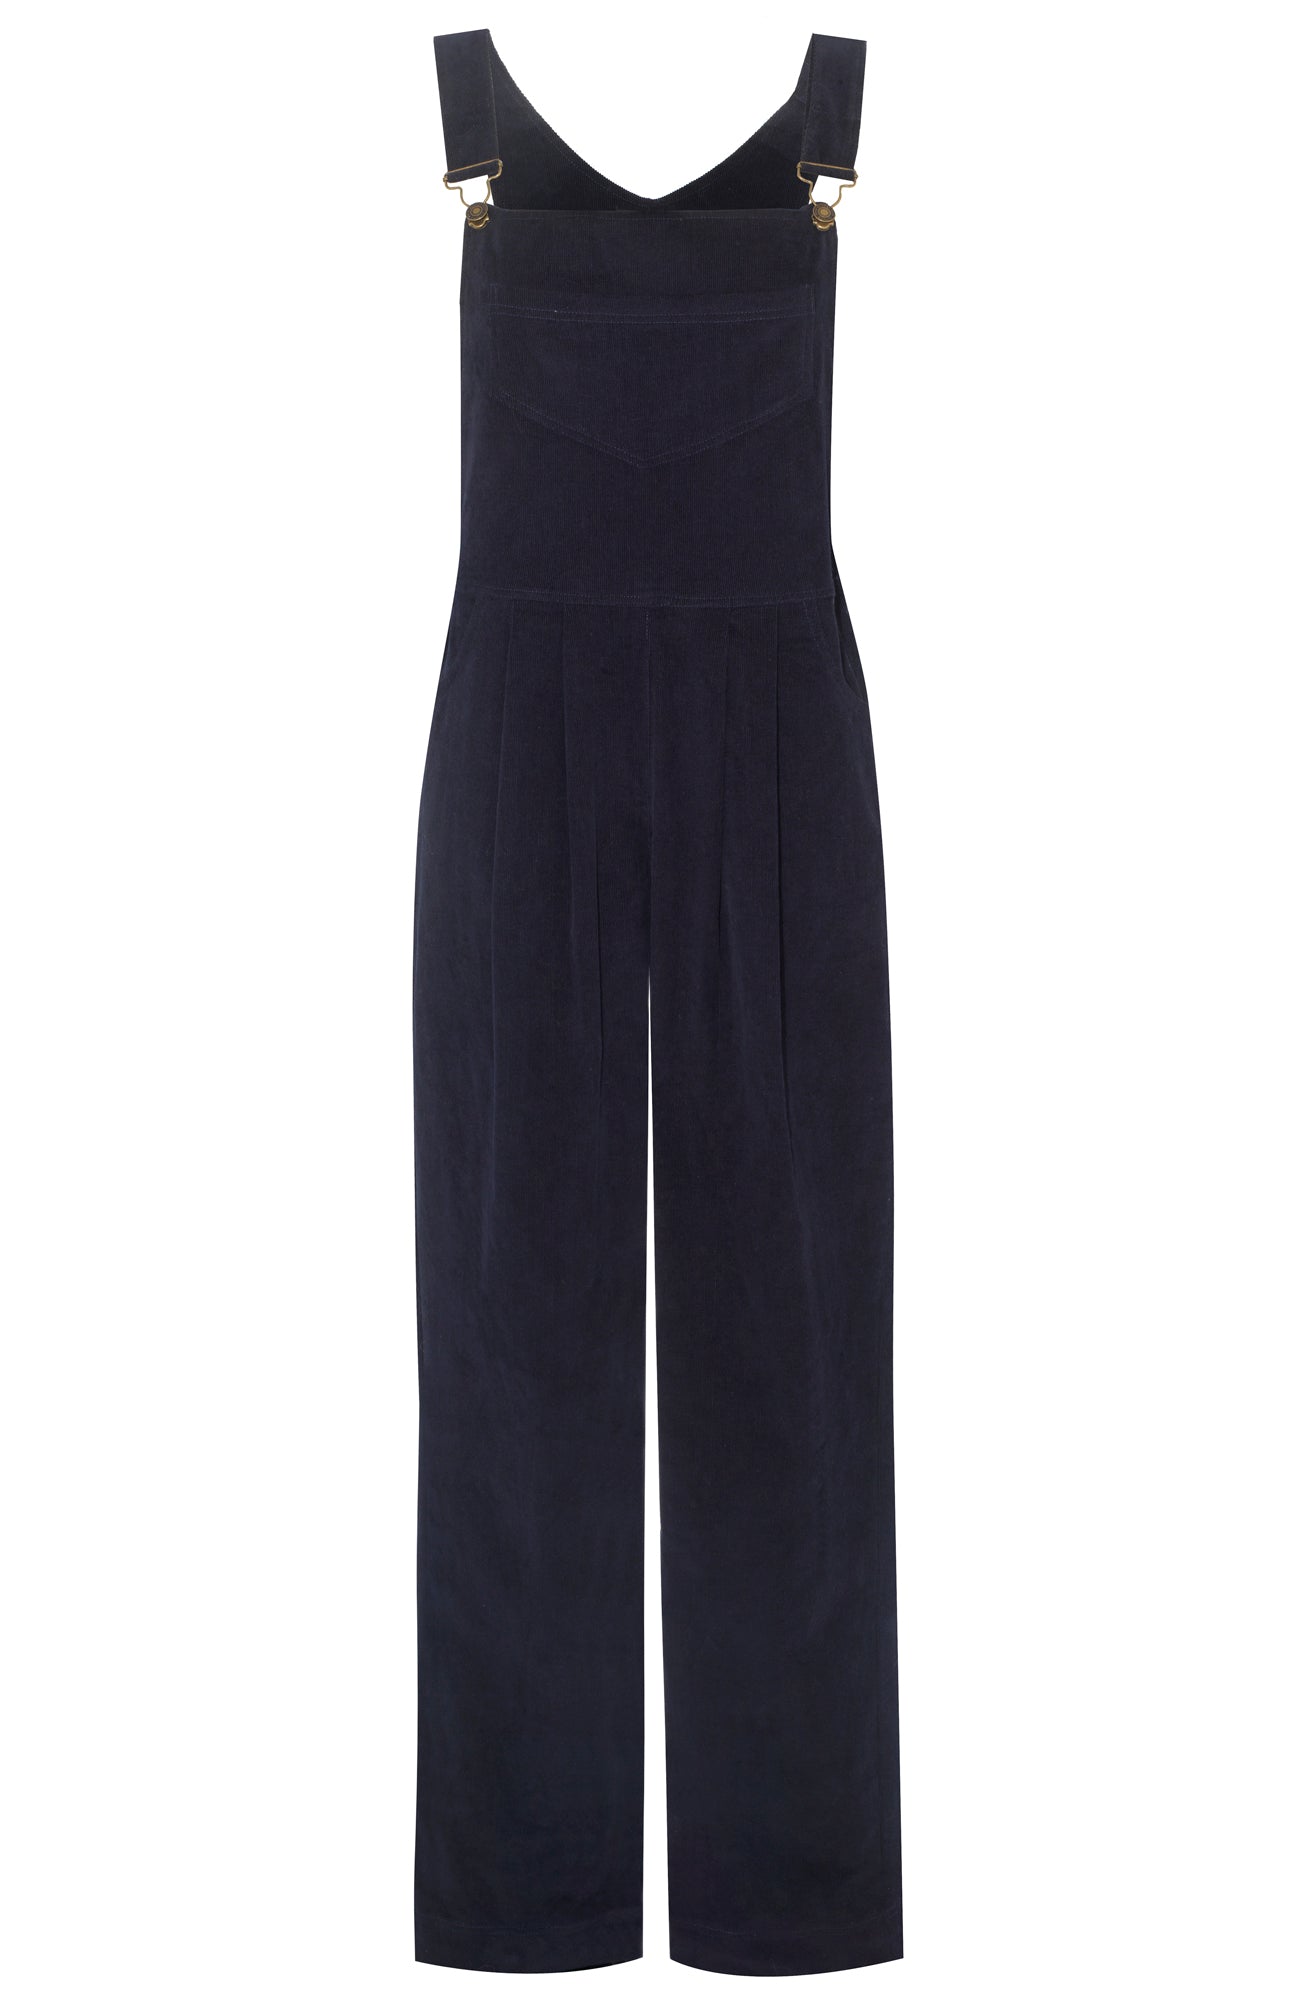 NAVY CORD DUNGAREES (SAMPLE) - Rock the Jumpsuit